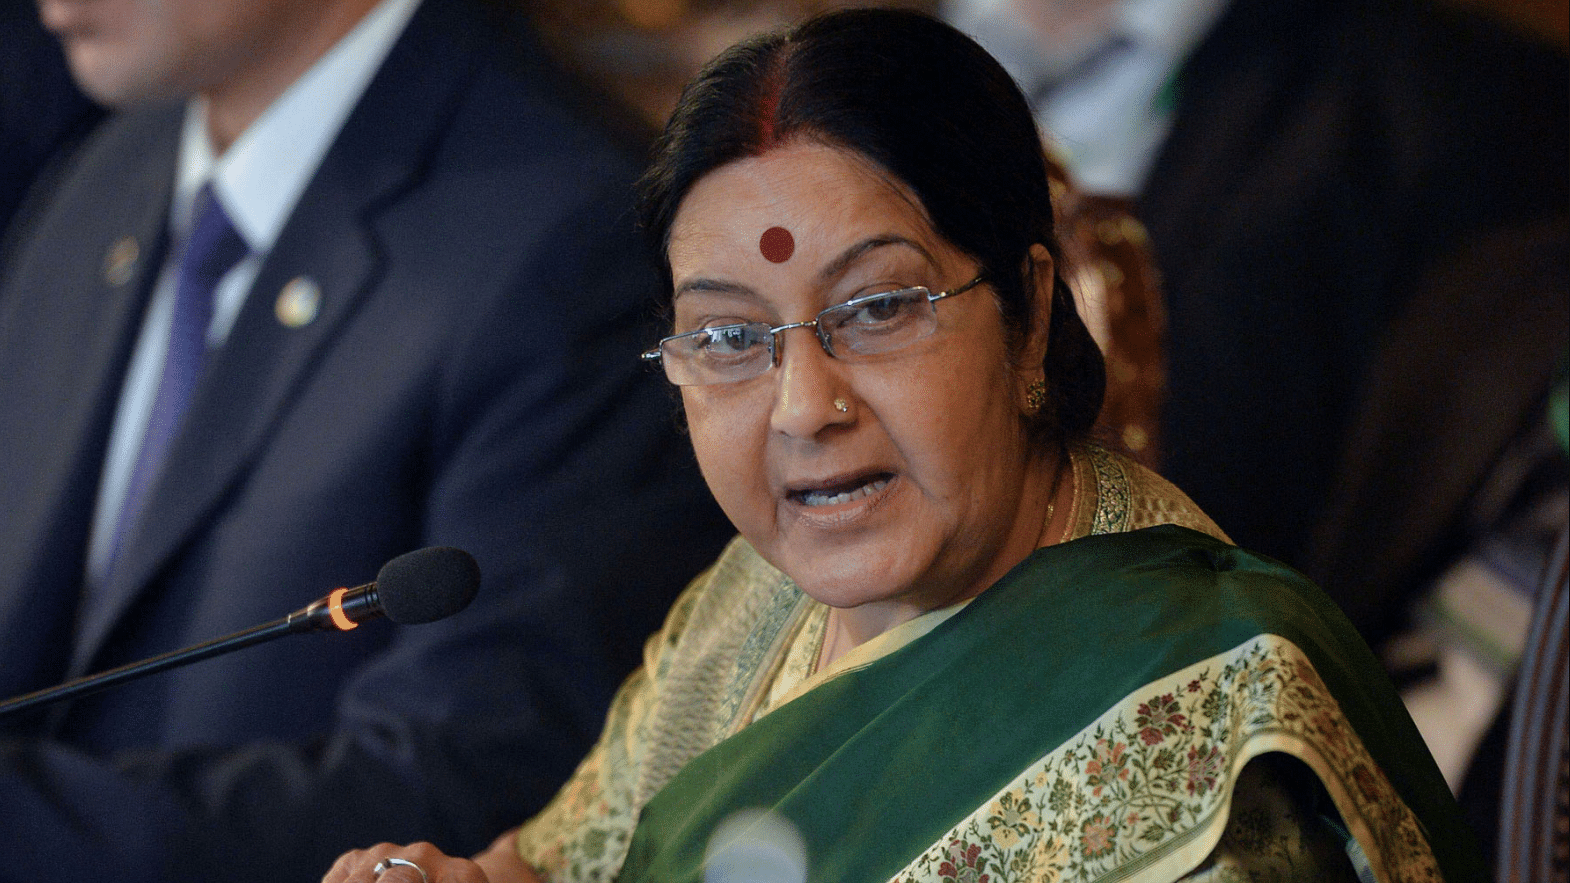 Minister of External Affairs Sushma Swaraj also told Rajya Sabha on Thursday, 27 December that the “government of India was not involved in organising the visit and meetings”.